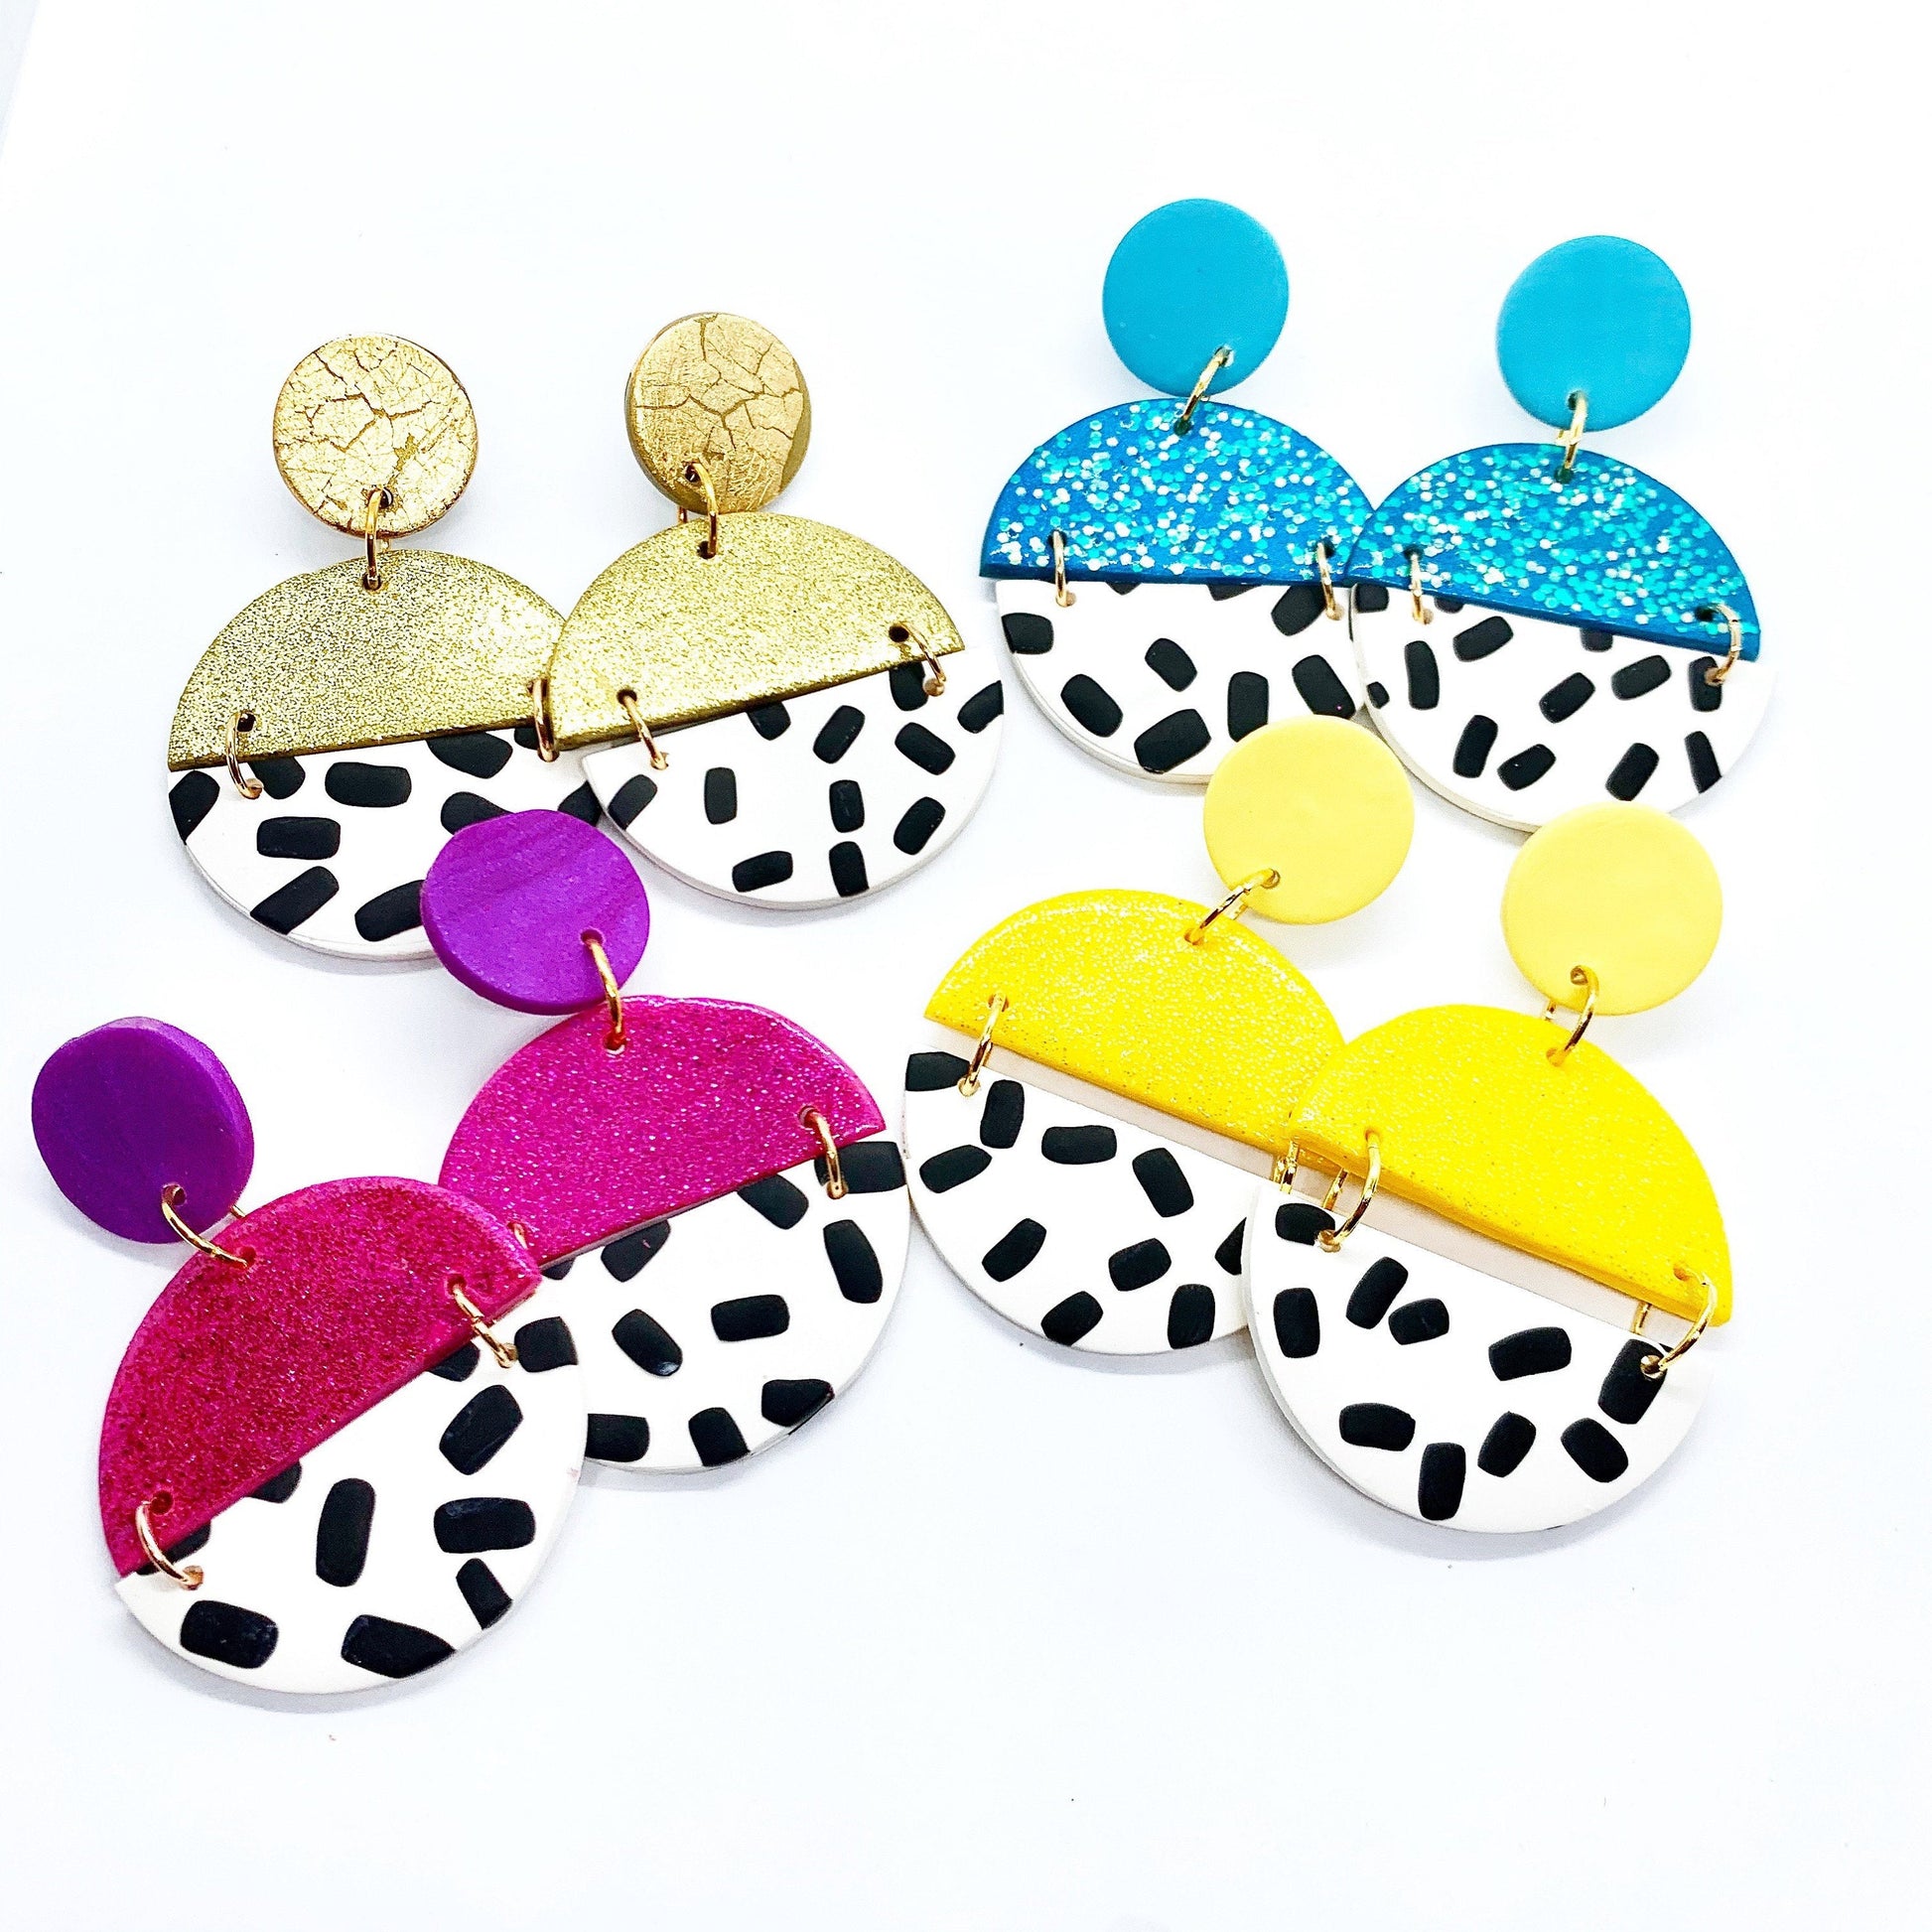 polymer clay earrings available in gold, blue, yellow and purple